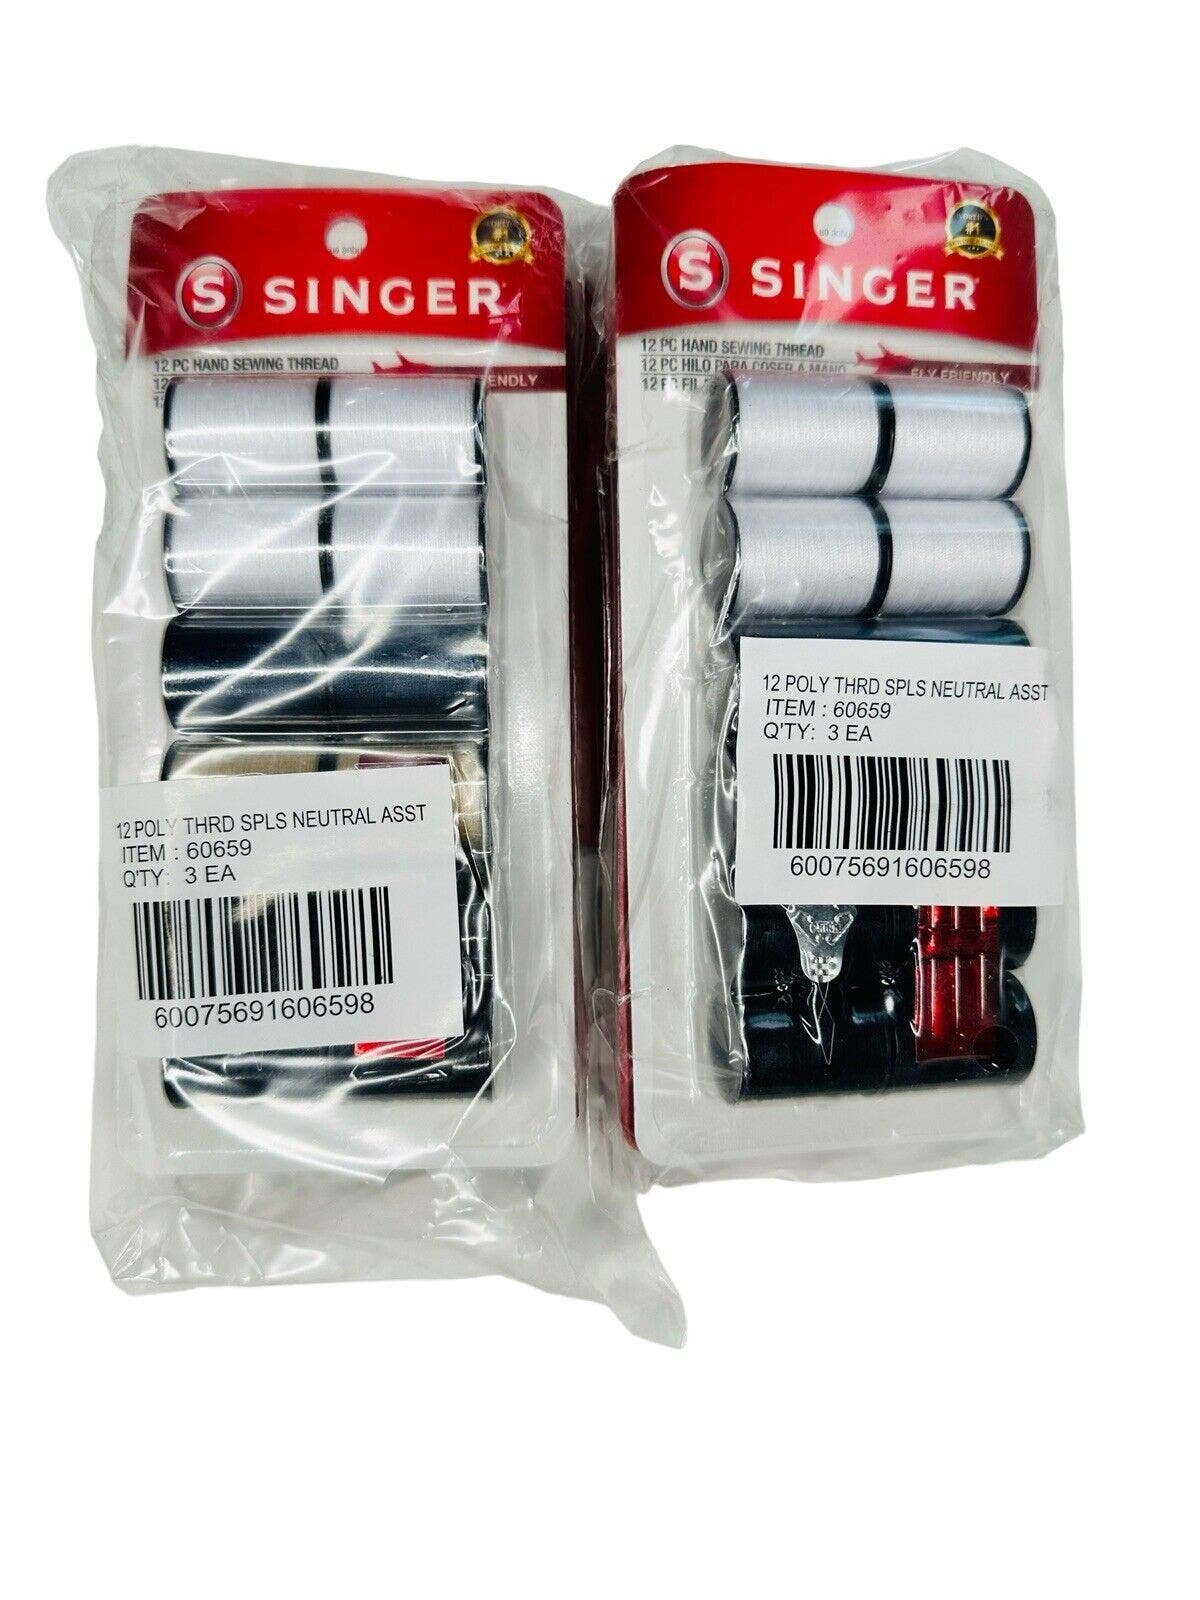 SINGER Polyester Hand Sewing Thread 12 Spools Needles & Threader Asst Colors 6pk - $29.37